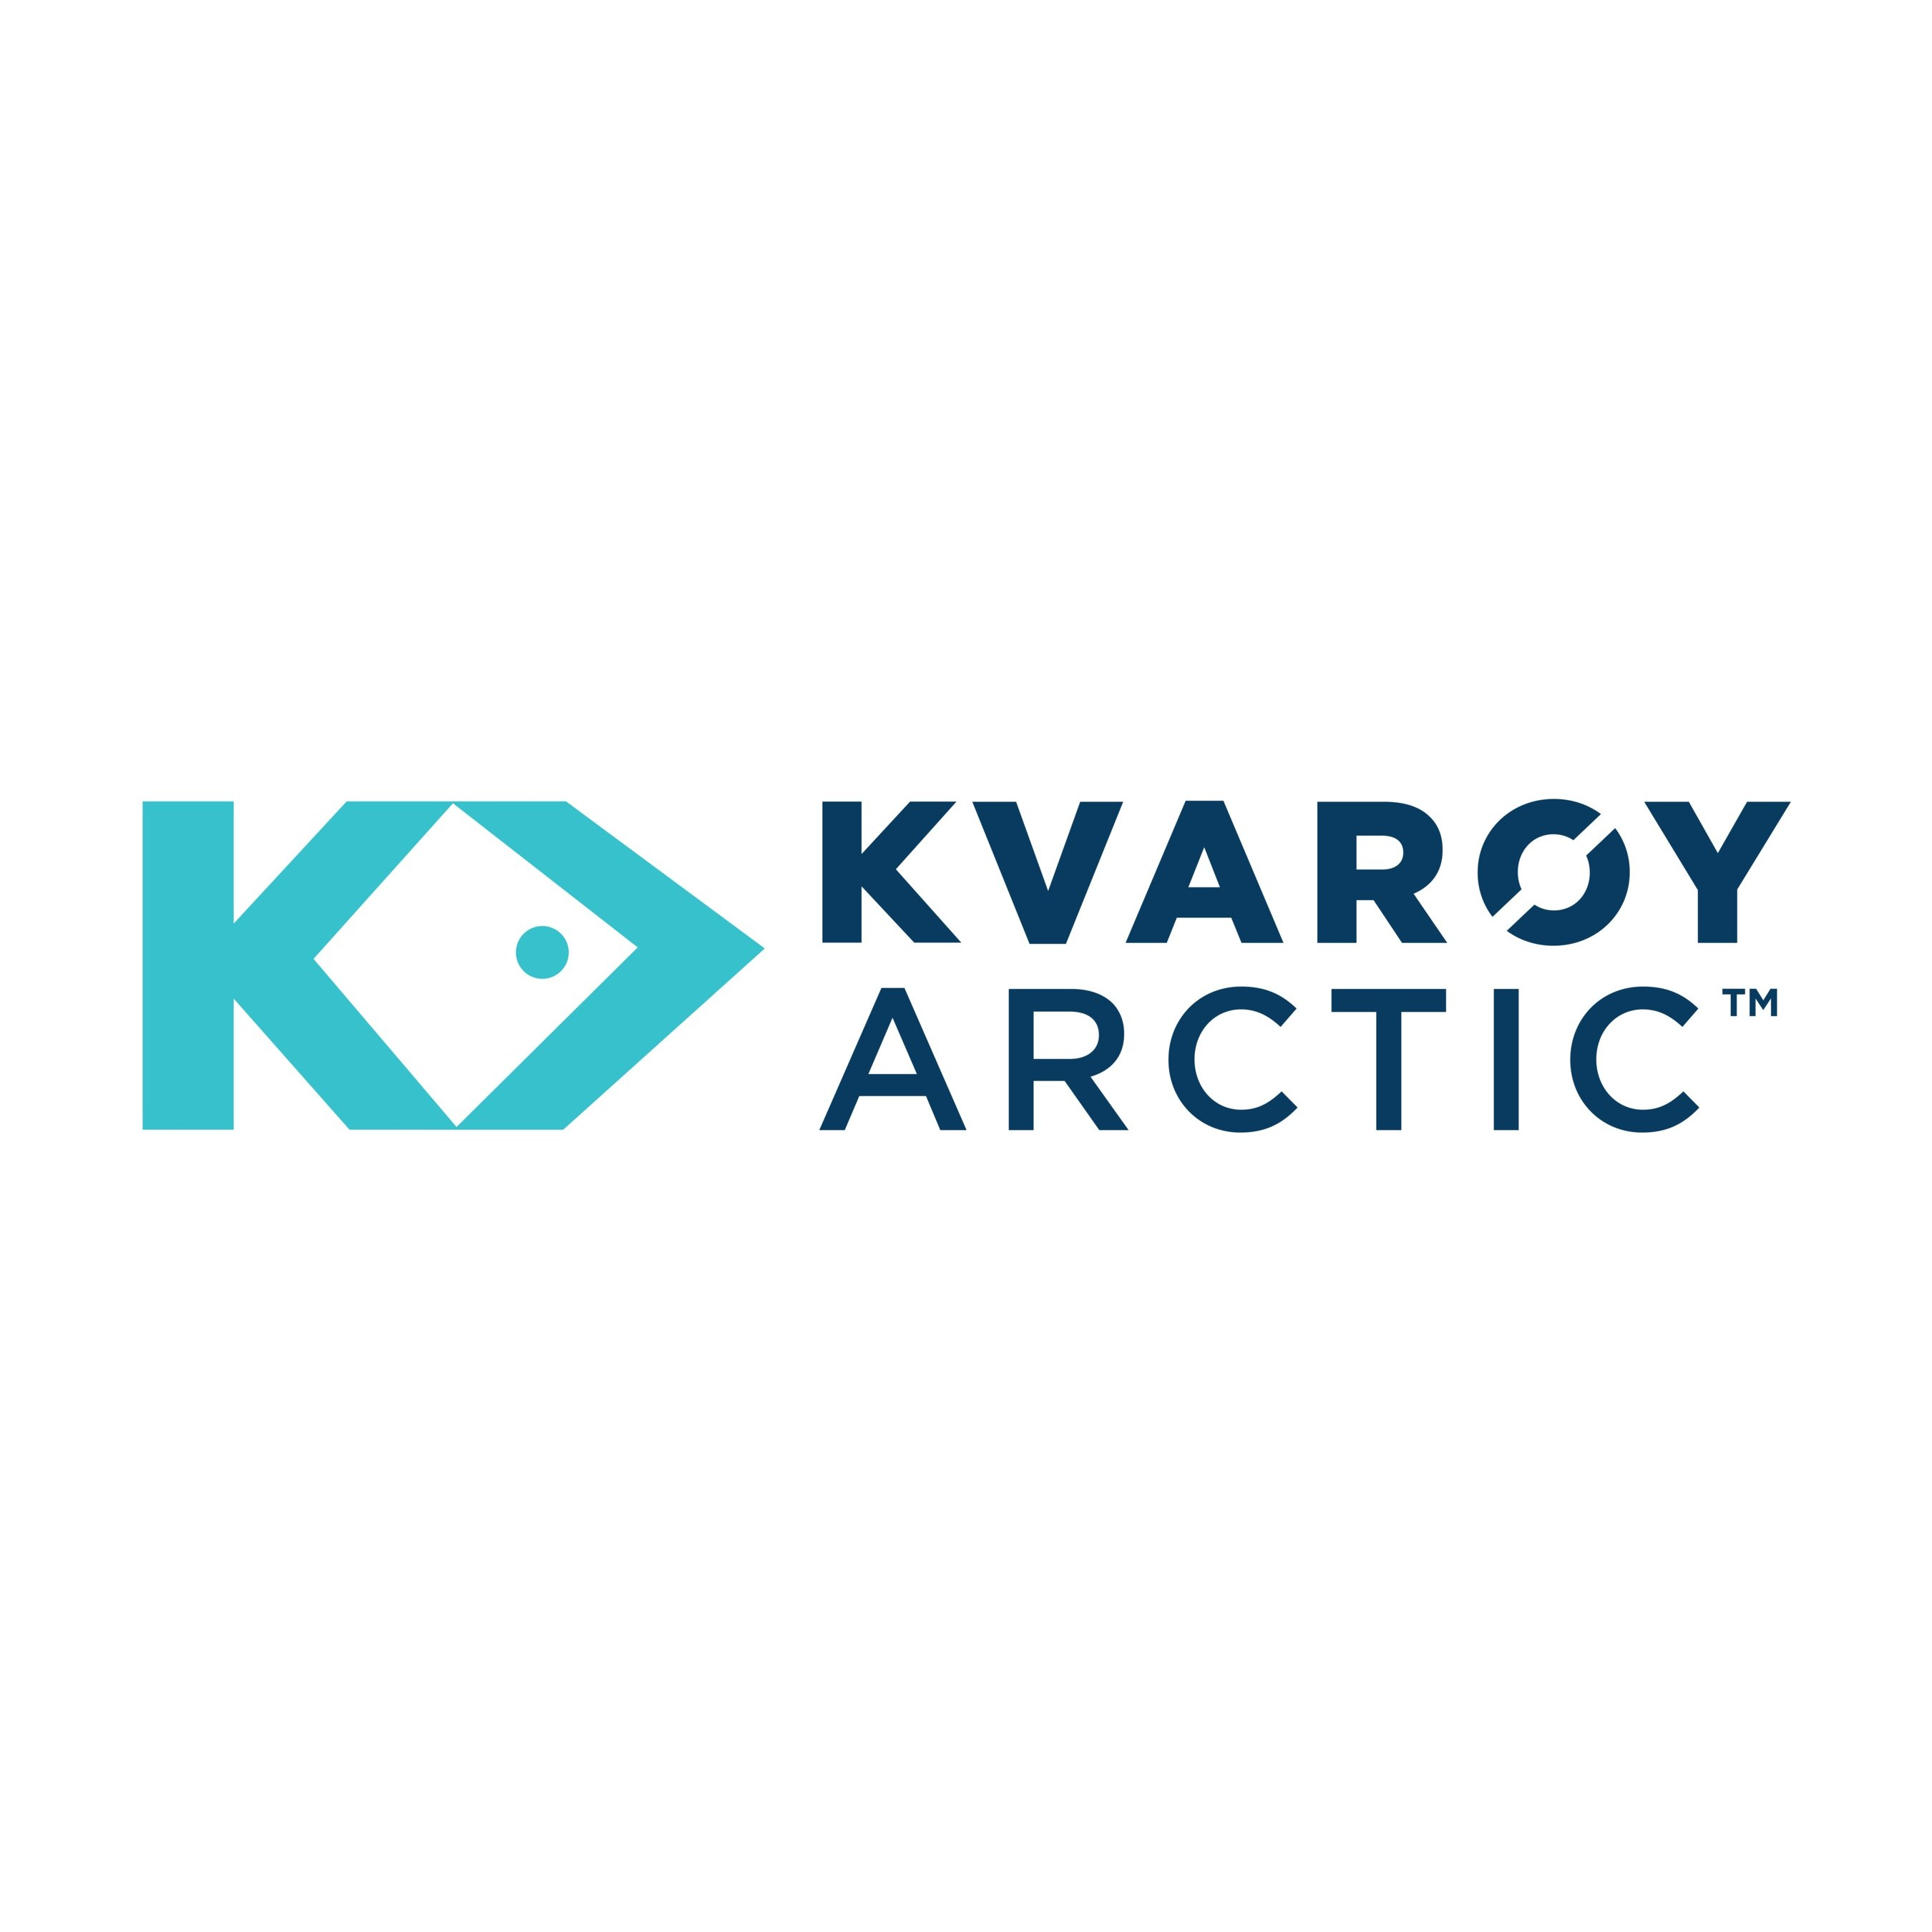 Kvarøy Arctic Using IBM Blockchain to Trace Norwegian Farmed Salmon to North American Stores